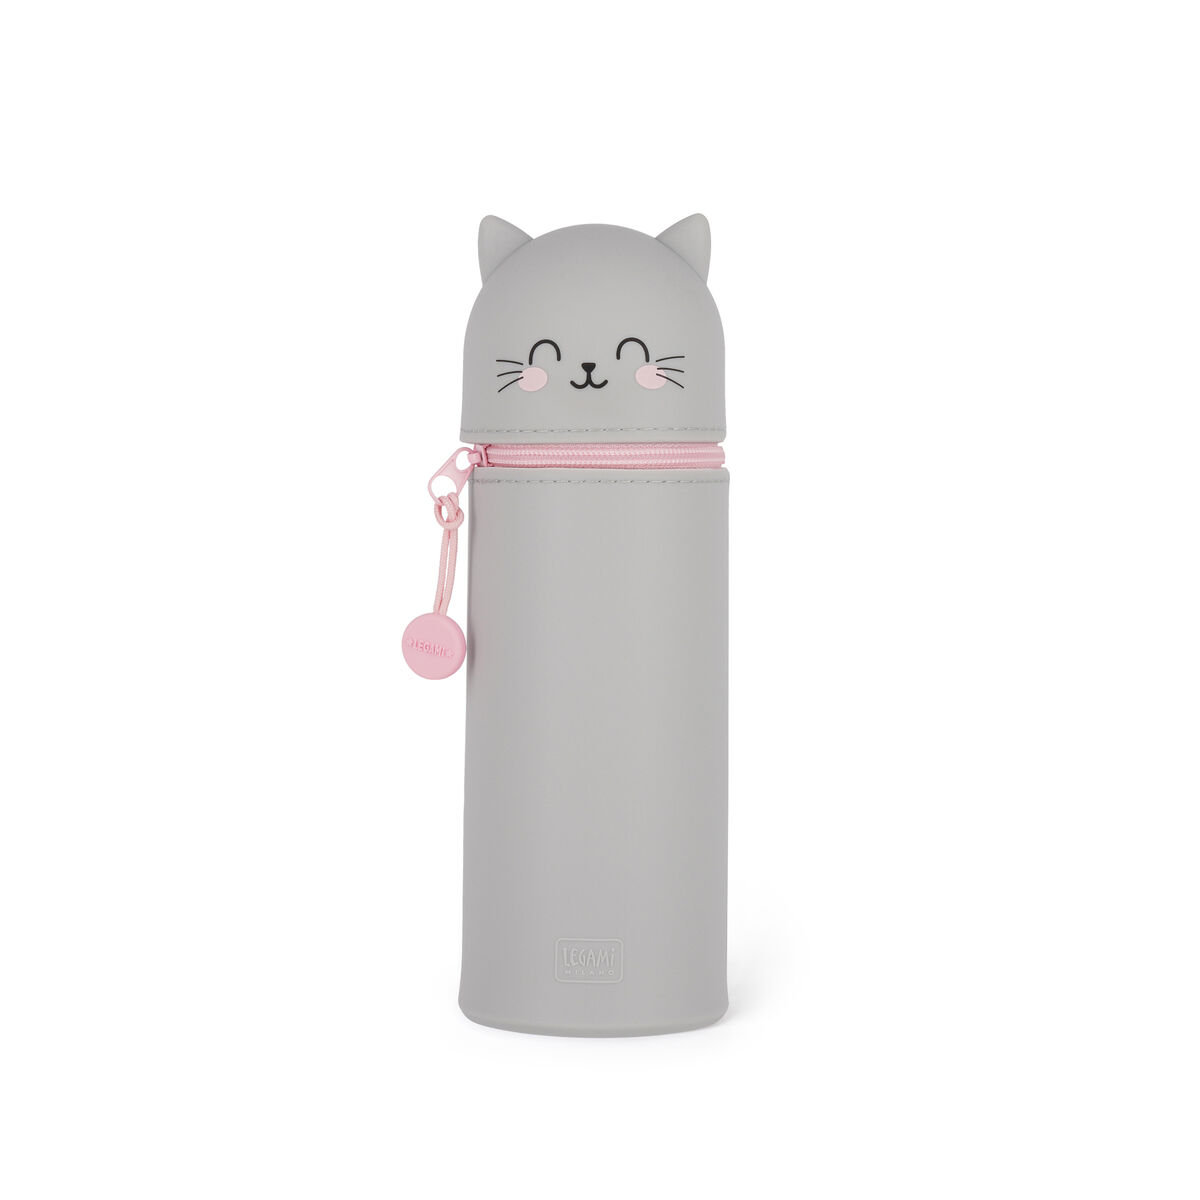 2 in 1 Soft Silicone Pencil Case - Kawaii KITTY